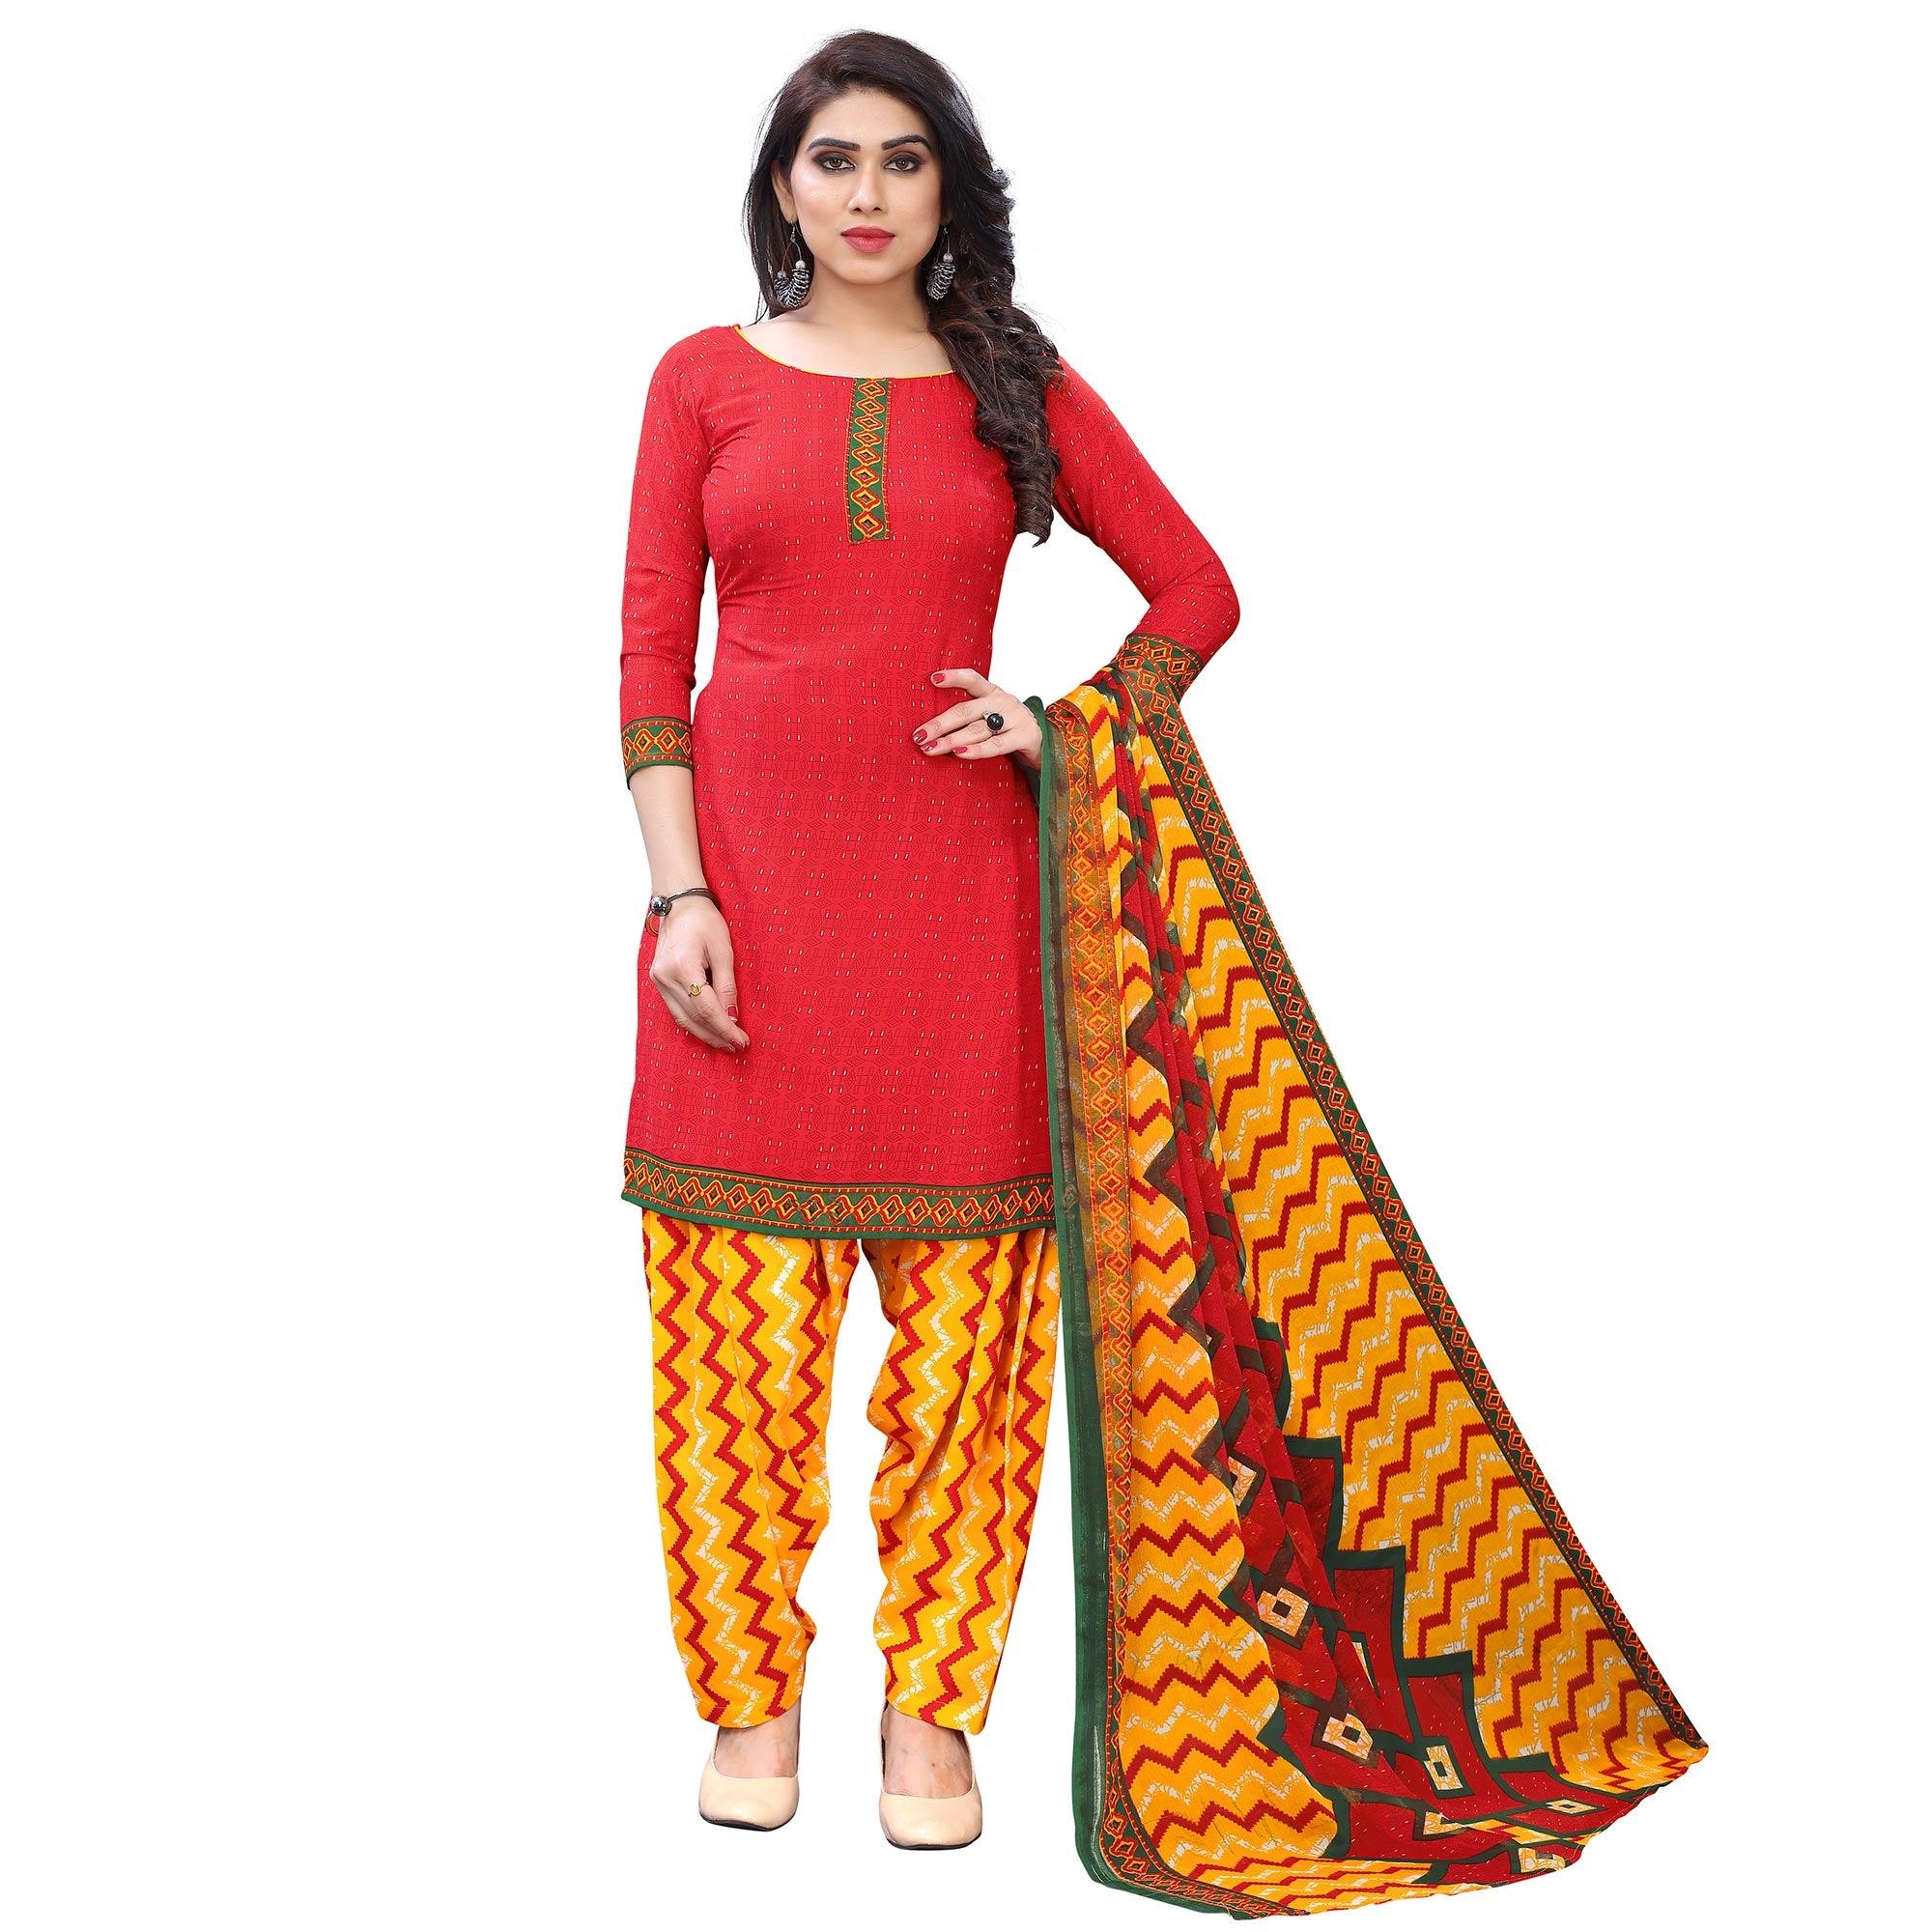 Energetic Peach Colored Casual Wear Printed French Crepe Patiala Dress Material - Peachmode